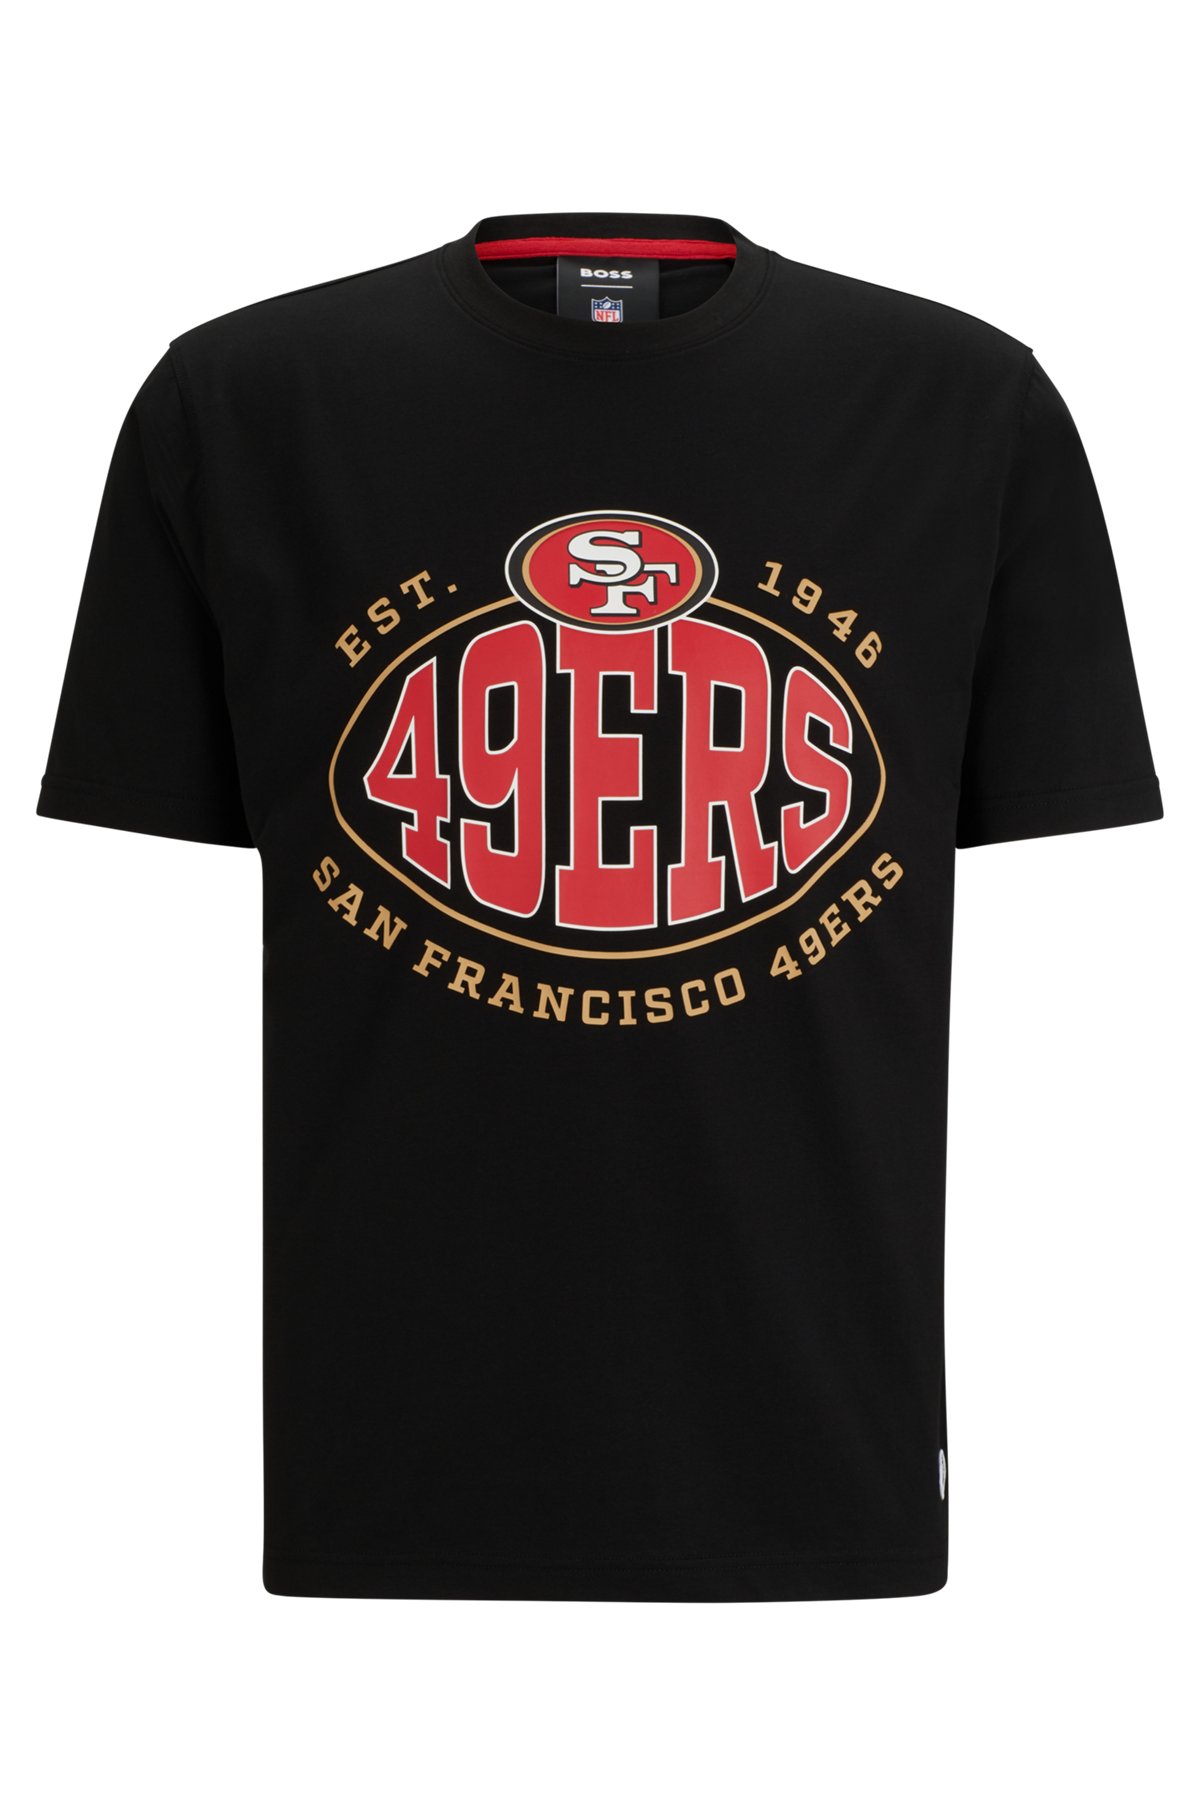  BOSS x NFL stretch-cotton T-shirt with collaborative branding, 49ers